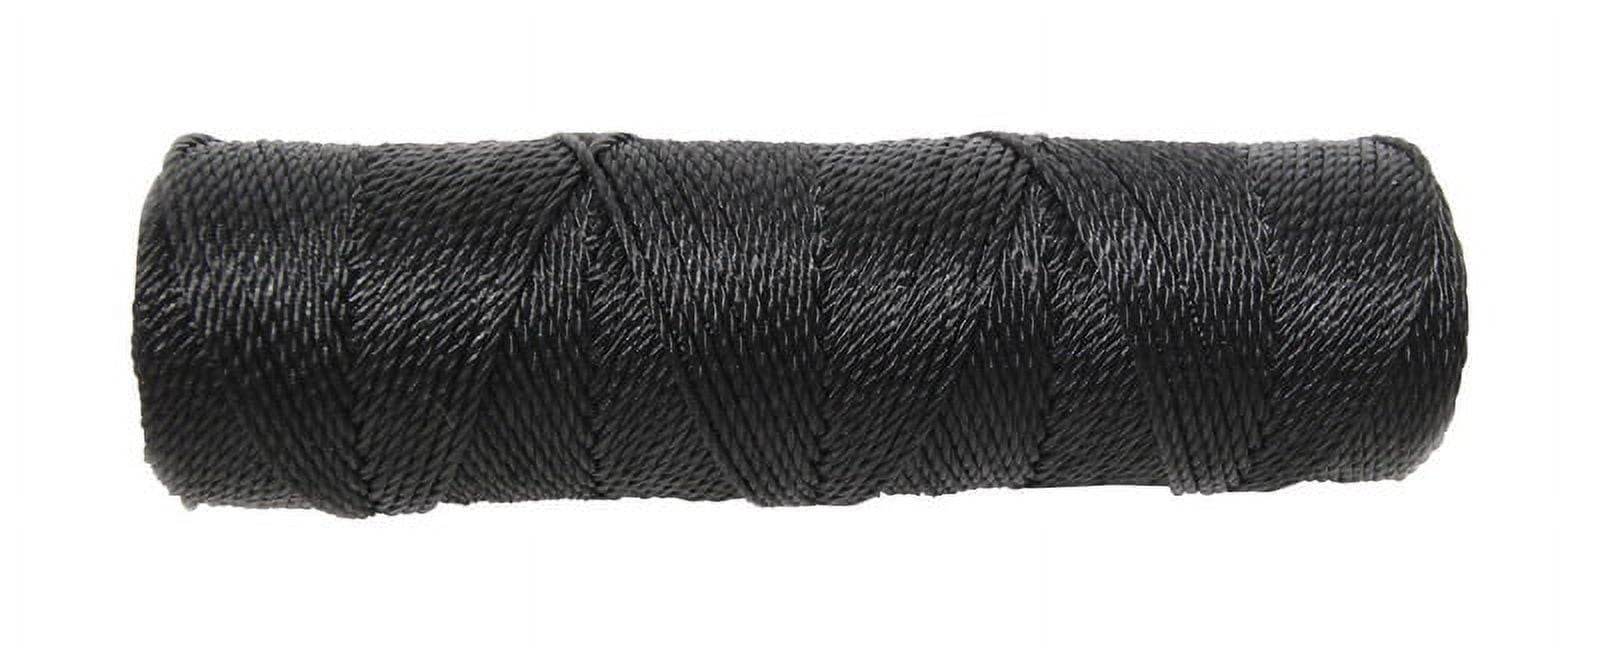 MLR Packaging Supplies and Equipment. 1/4 LB Tube Twisted Nylon Seine Twine